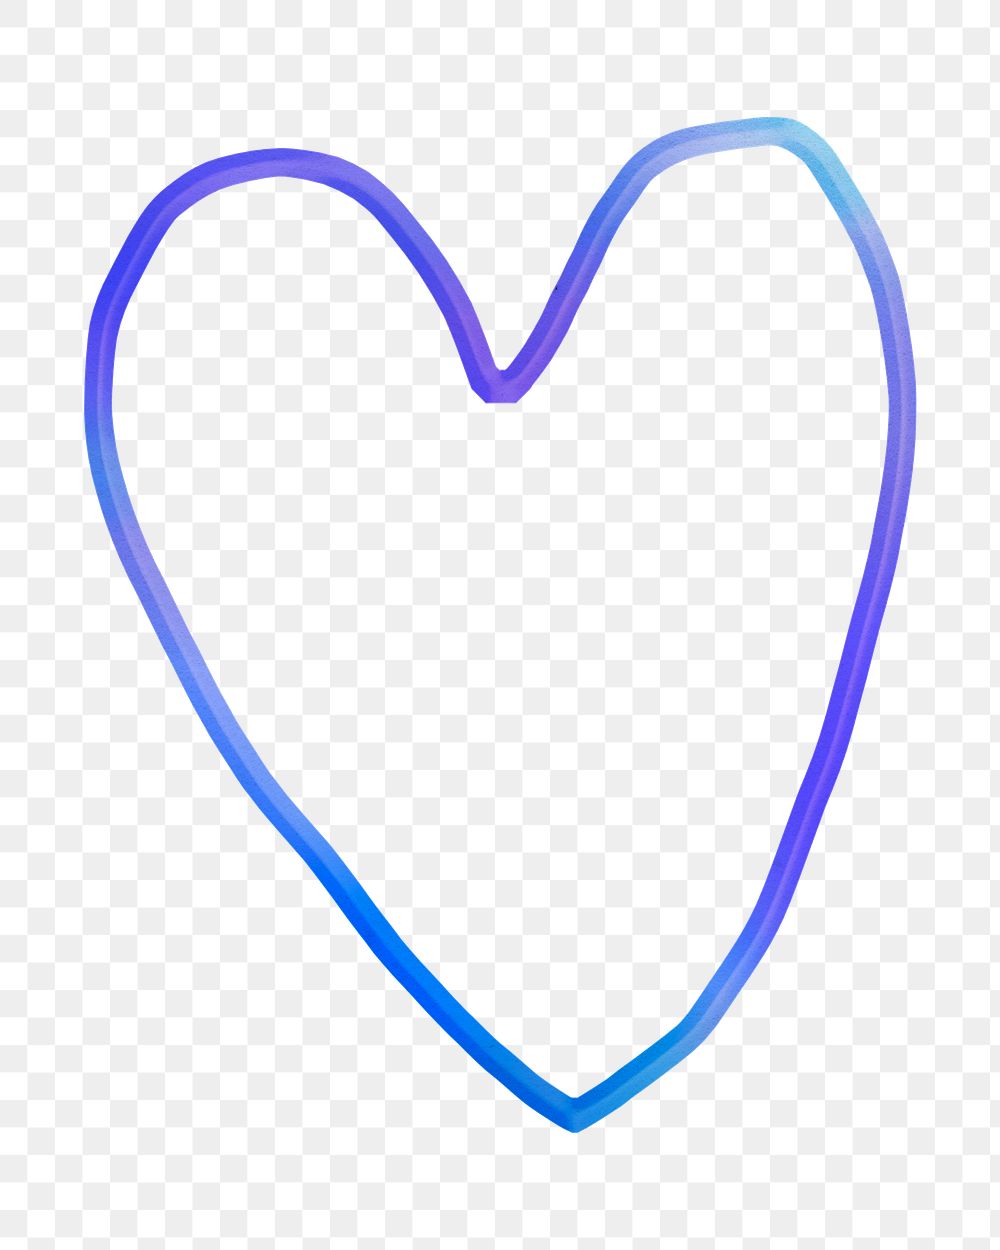 Heart png sticker in blue color